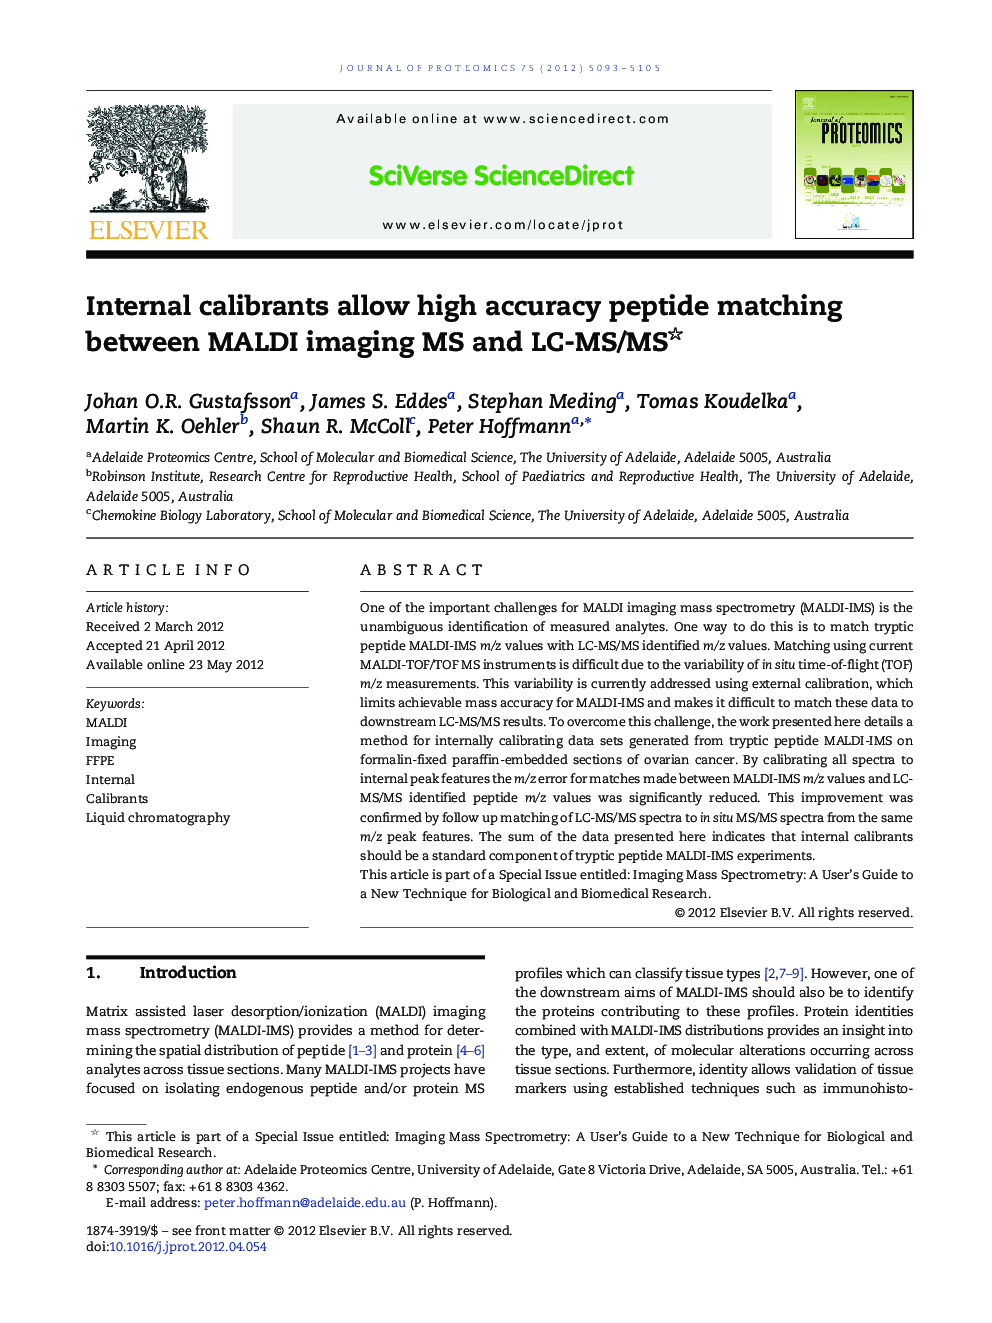 Internal calibrants allow high accuracy peptide matching between MALDI imaging MS and LC-MS/MS 